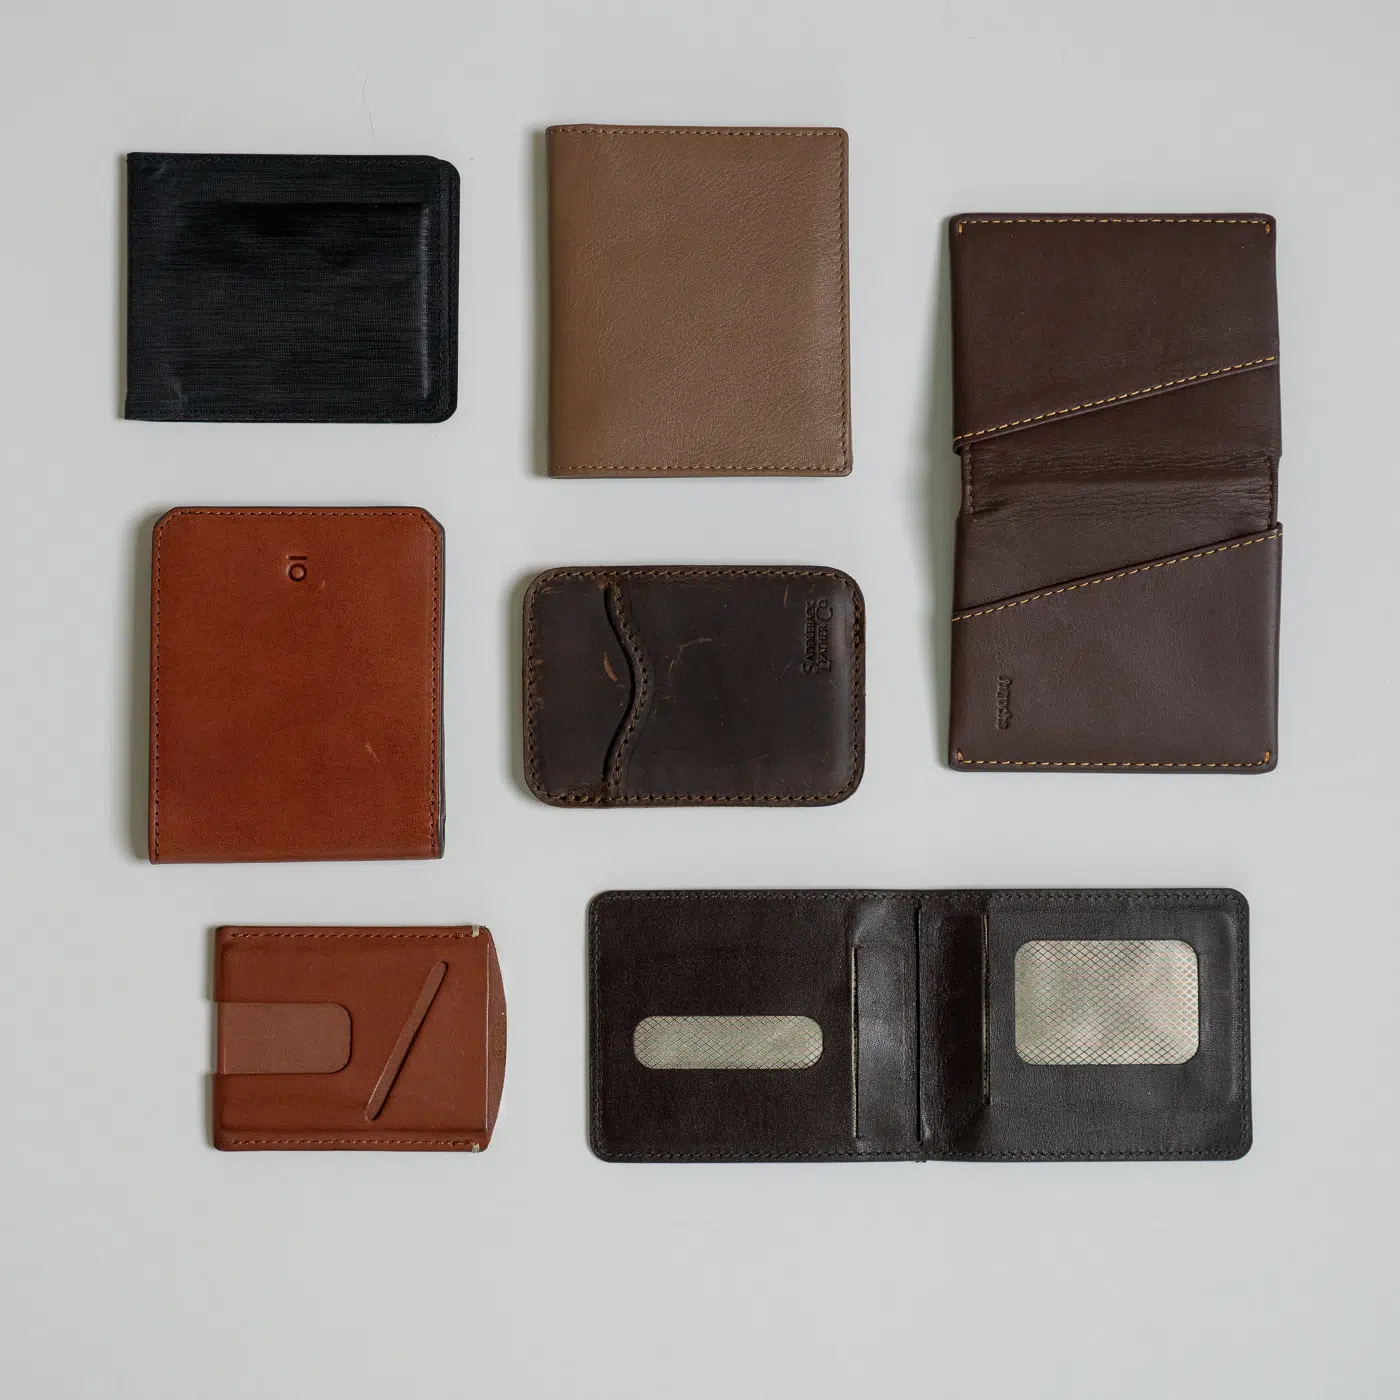 23 Best Slim Wallets for Men (2022 Buying Guide) - The Modest Man